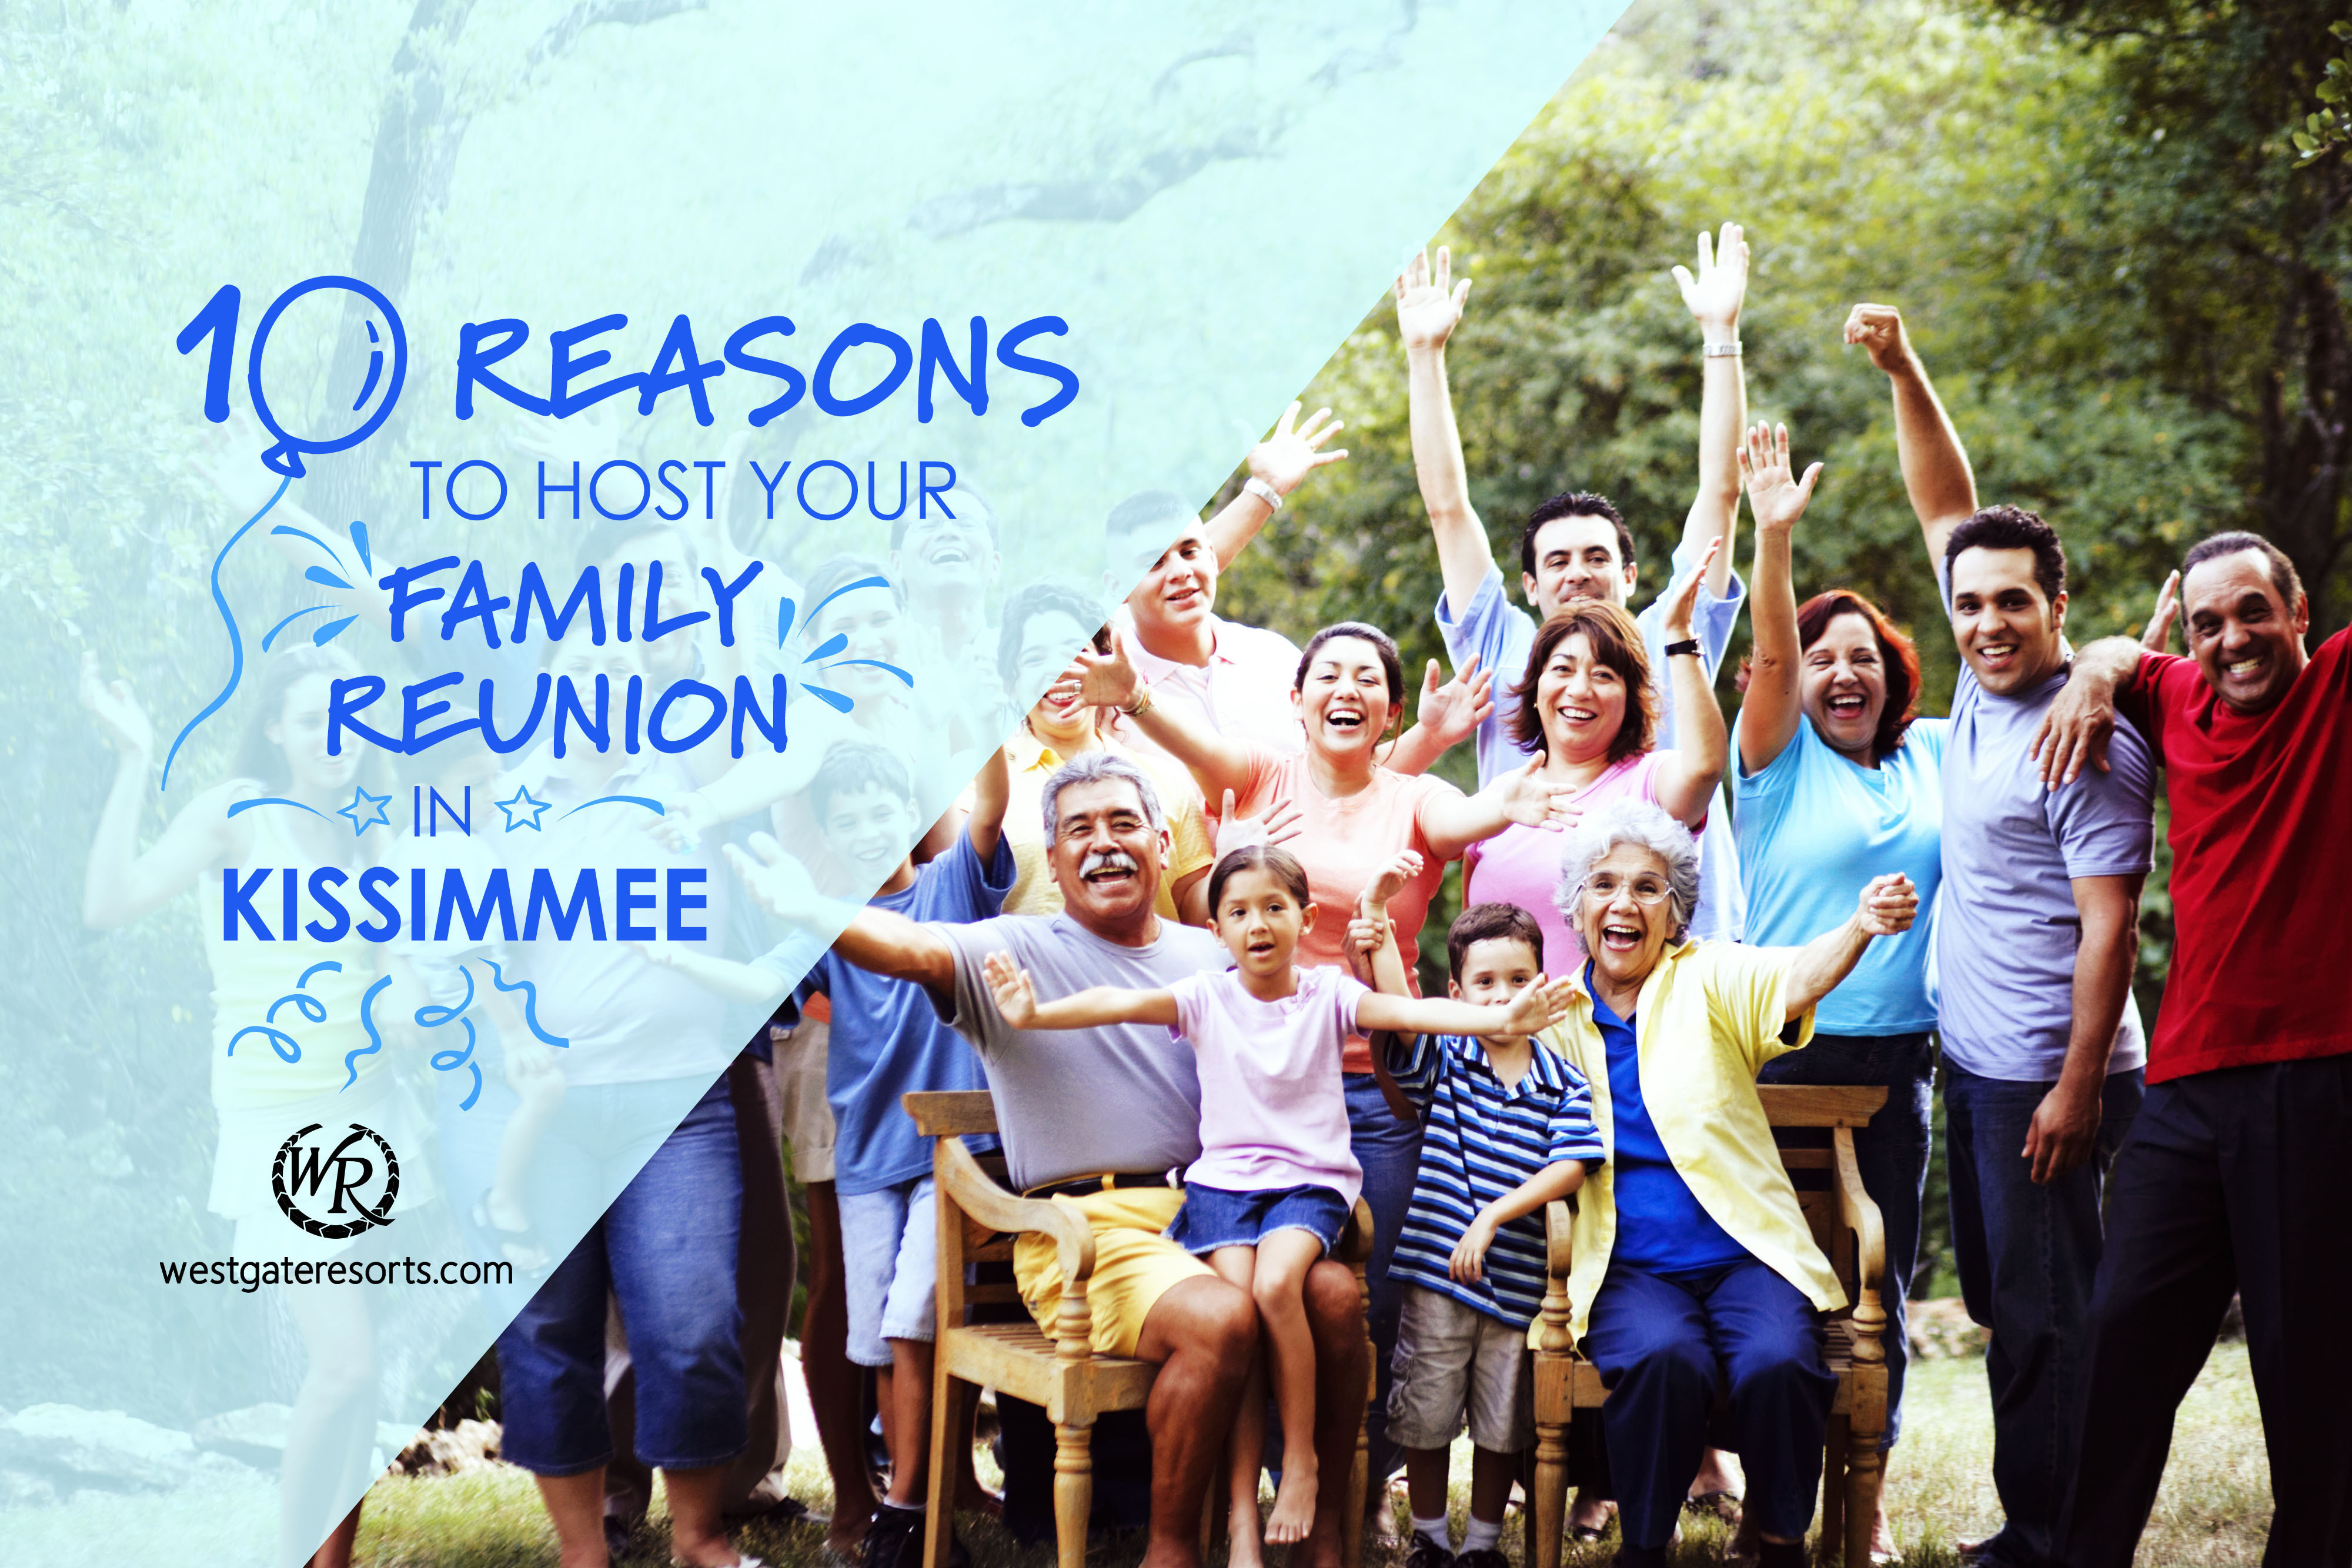 10 Reasons to Host Your Family Reunion in Kissimmee Florida!